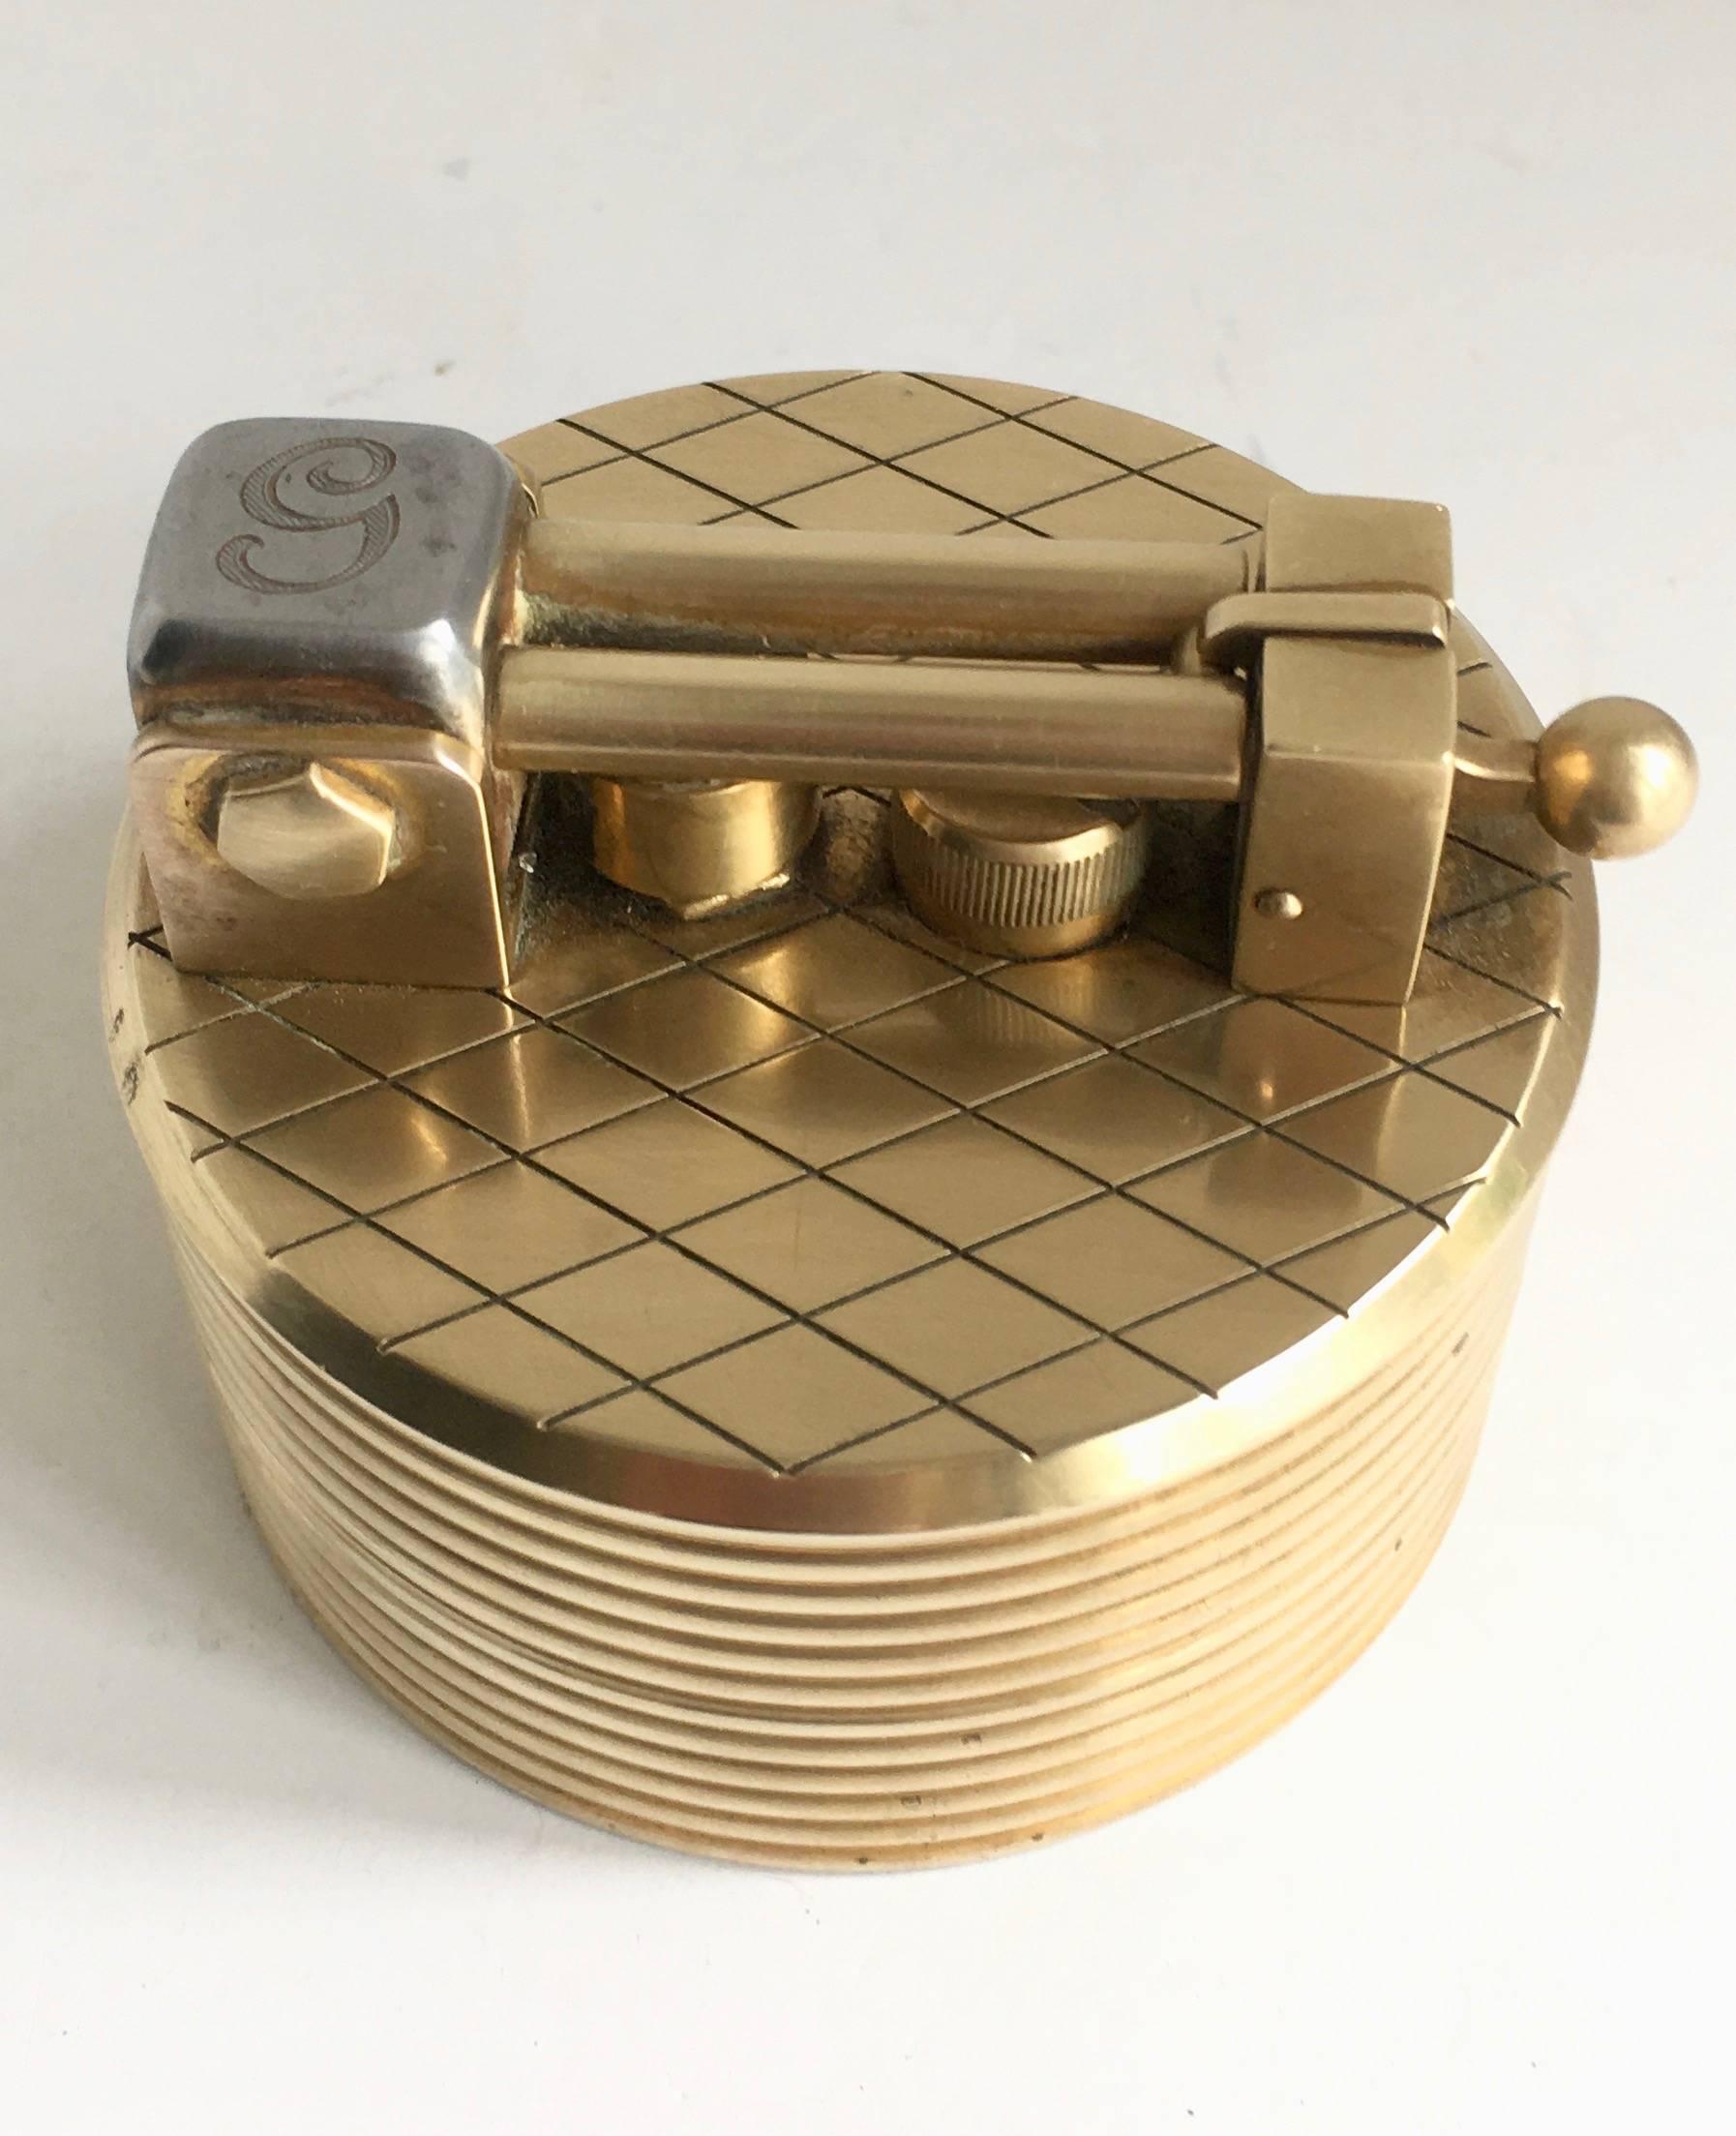 A gold-plated Gubelin lighter created by Dunhill in the 1960s - this piece is extraordinary and beautiful - Machine Age, industrial look... would be a great conversation piece or also could be used as a paper weight. While this does not currently